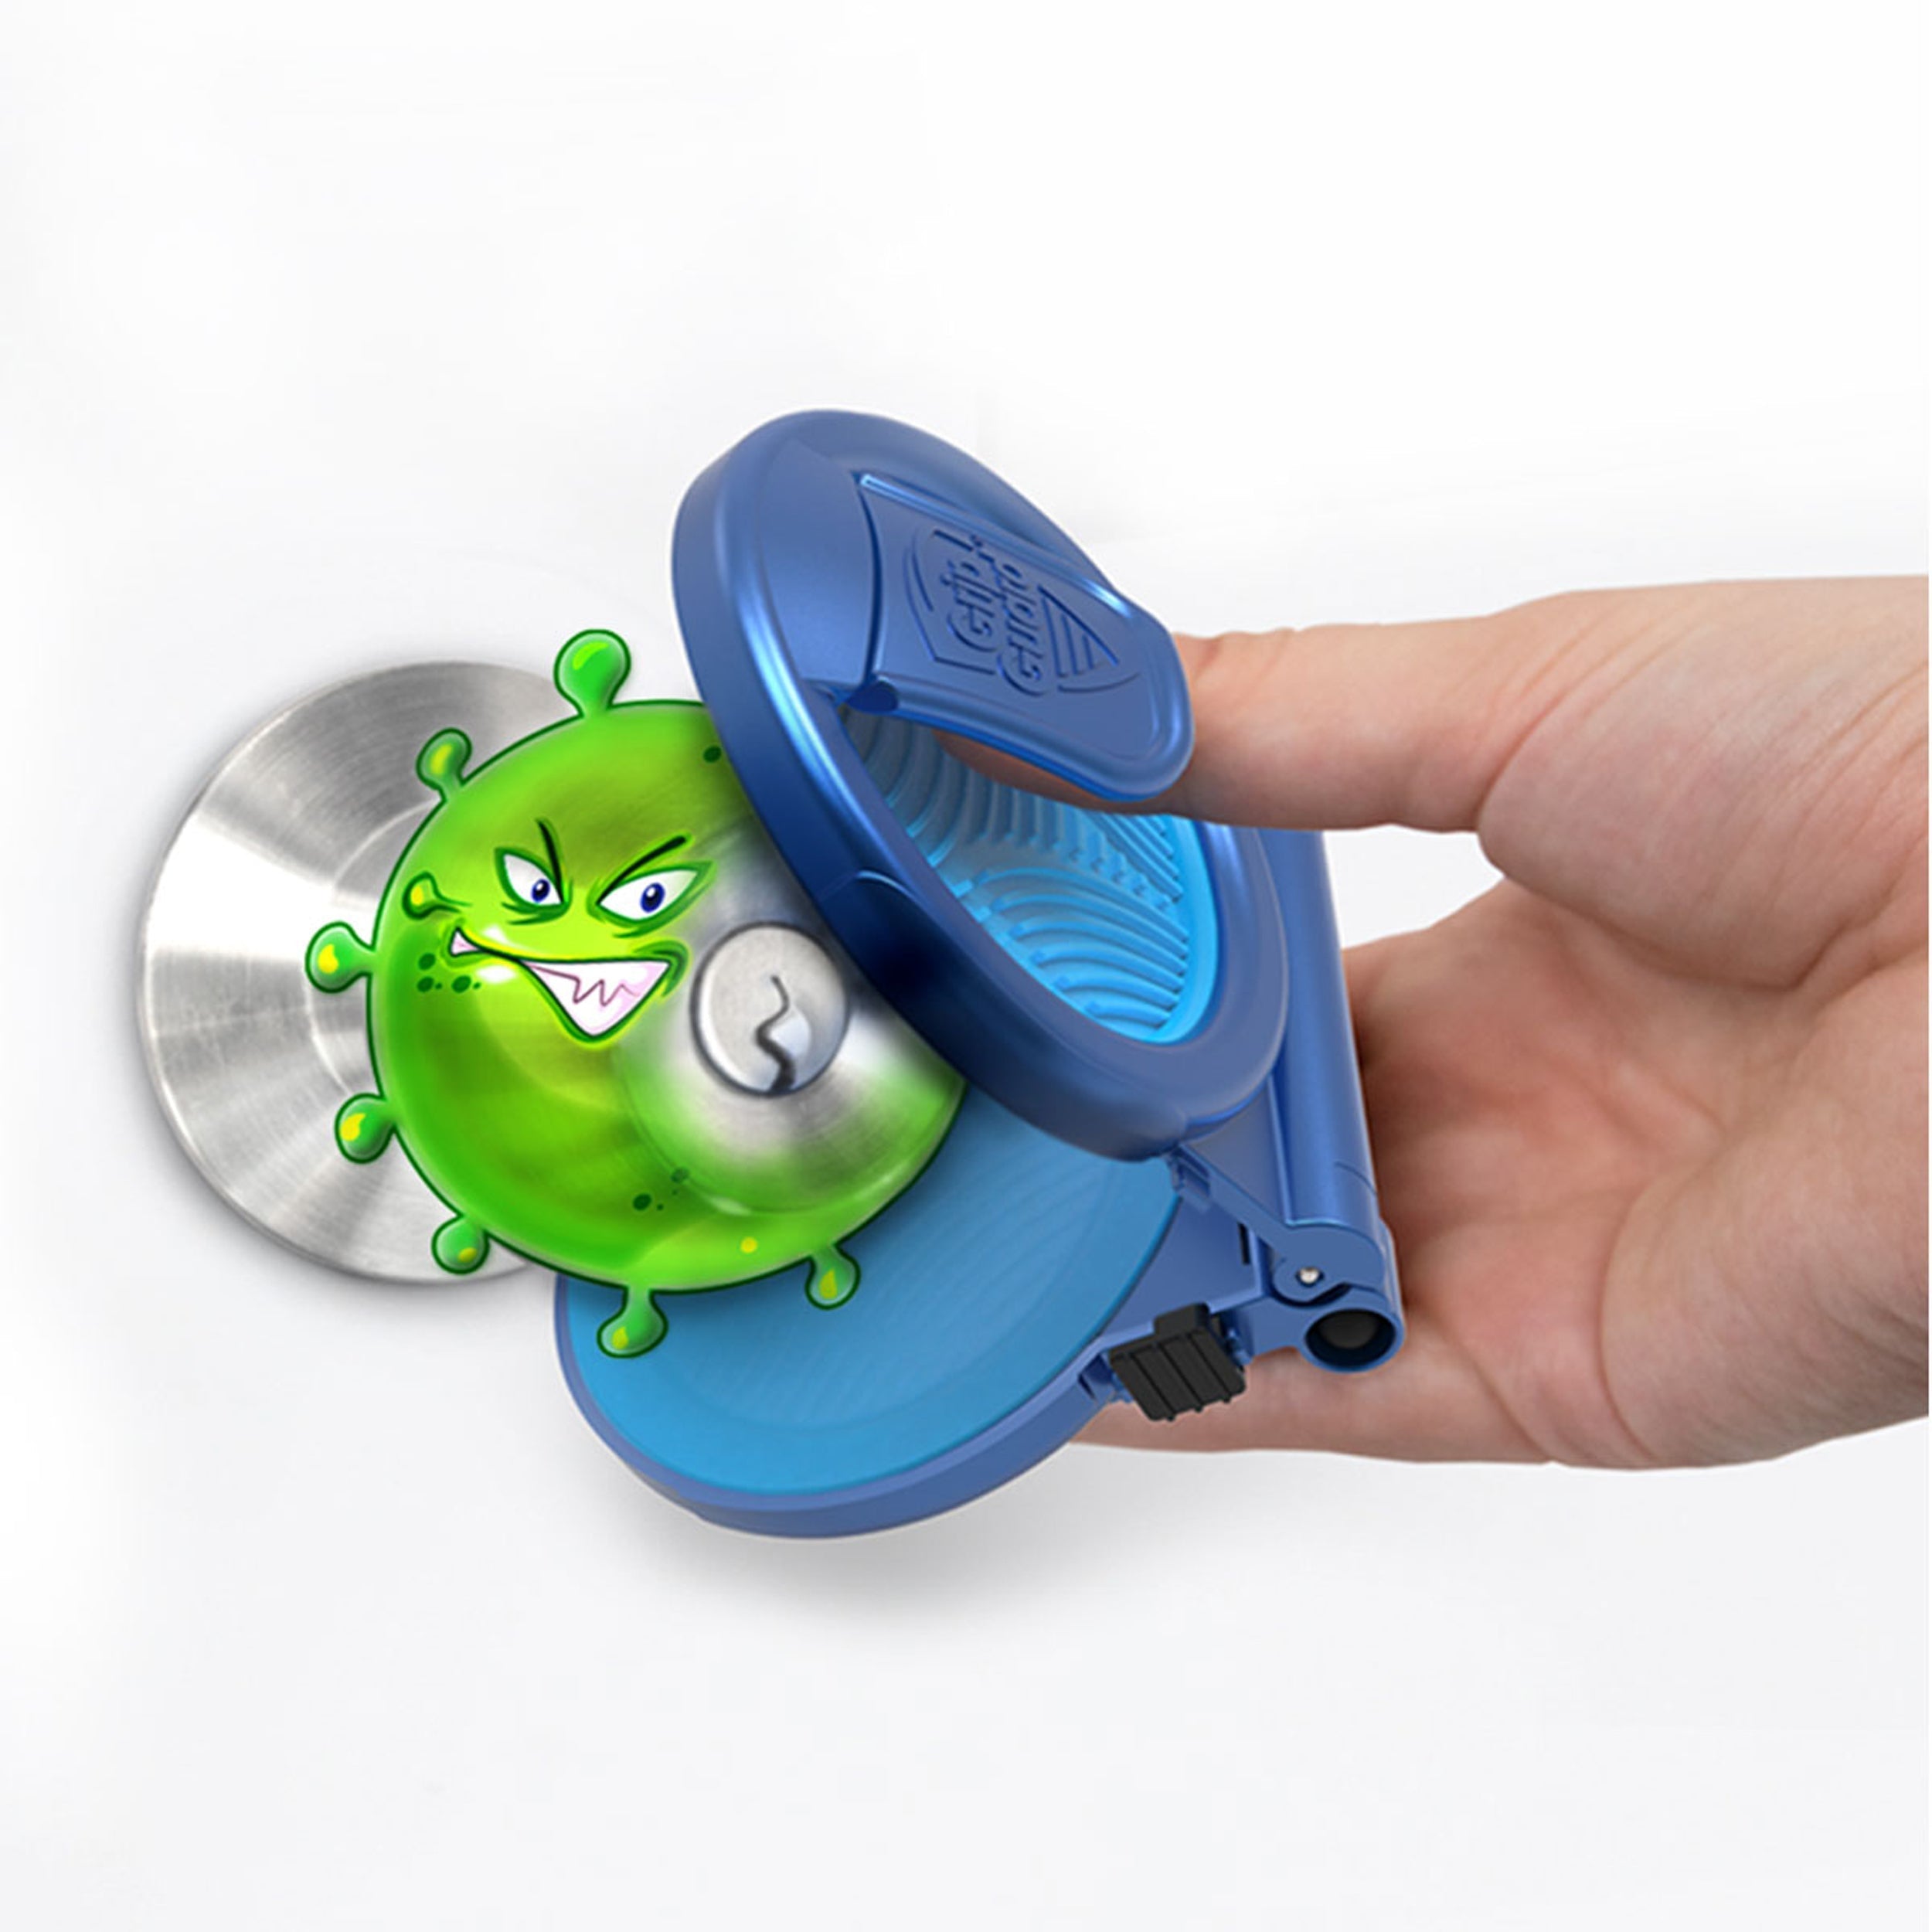 Doombox Enclosed Mouse - Keeps The Trap (&mice( from Pets & Kids at Play